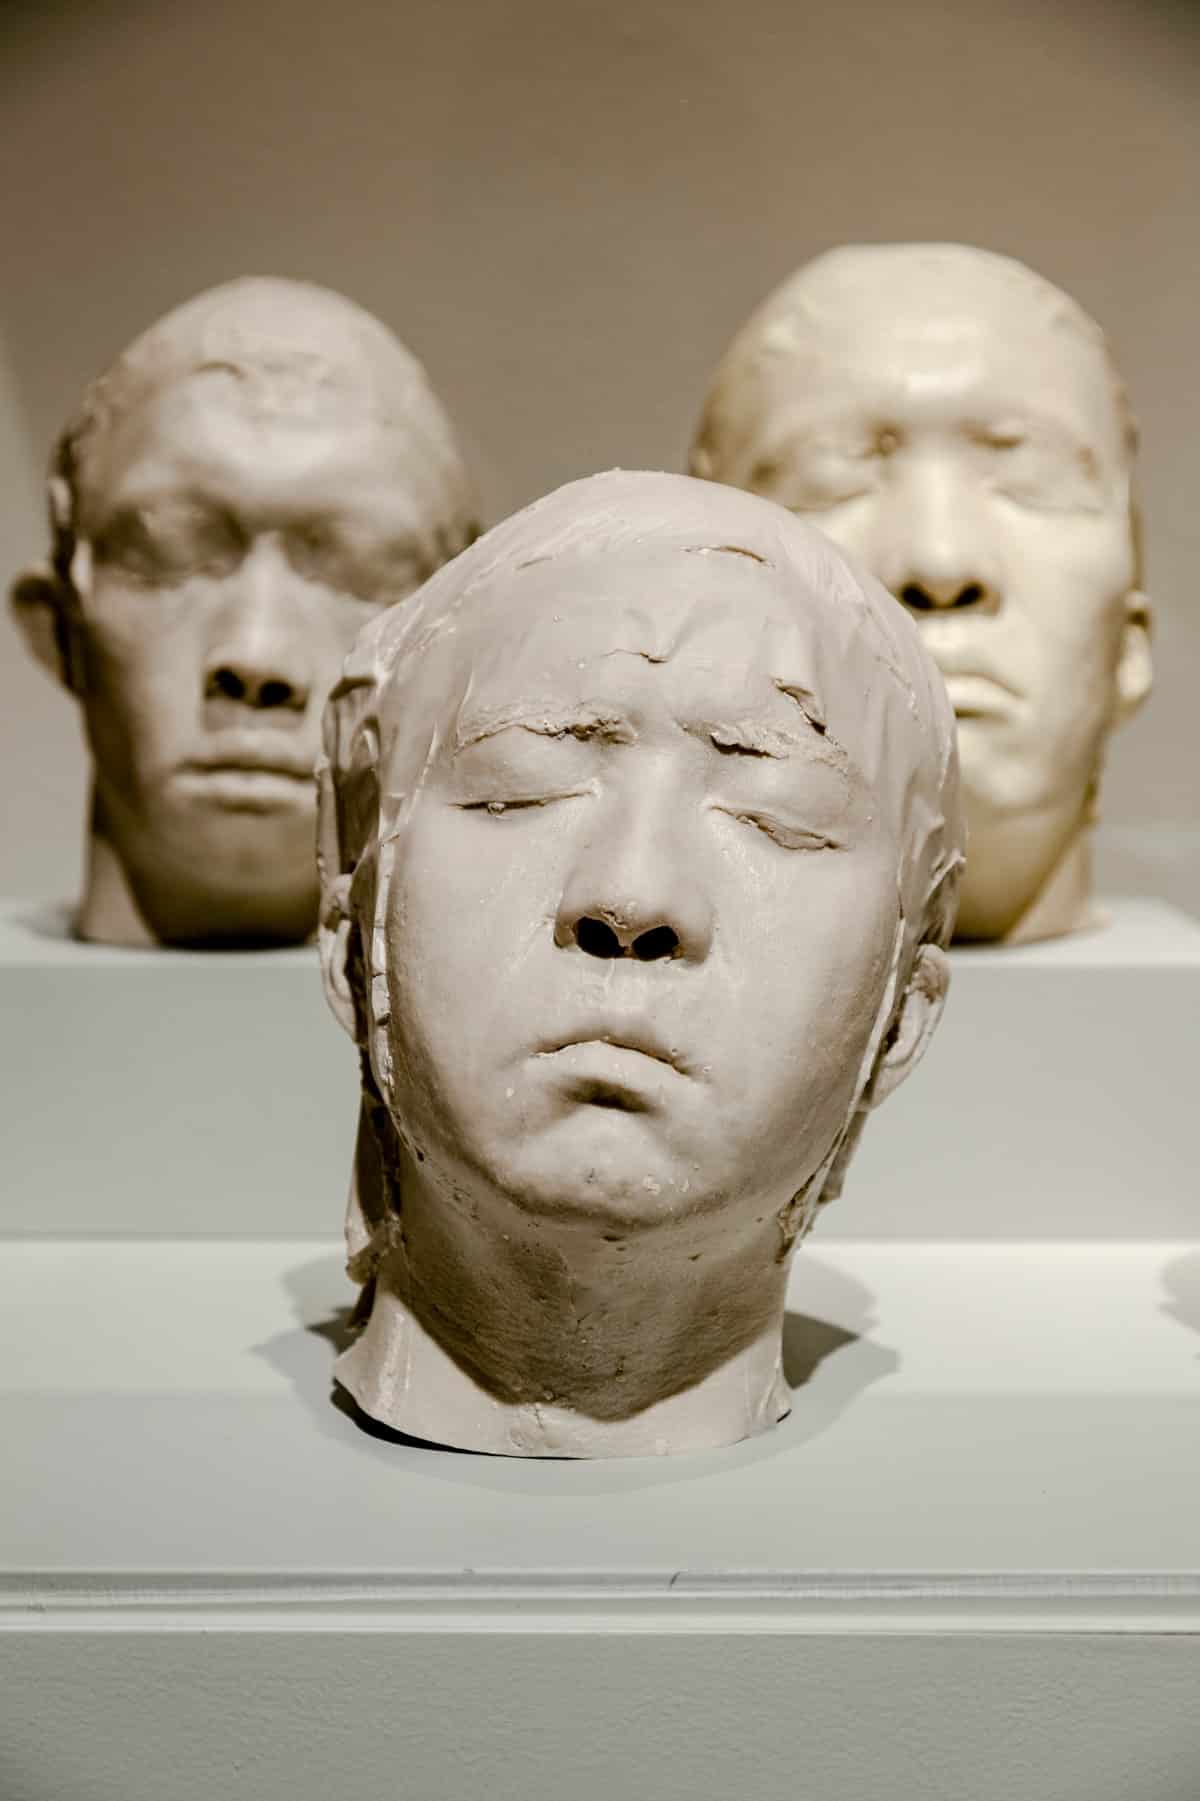 Contemporary Chinese sculpture by Zhang Dali